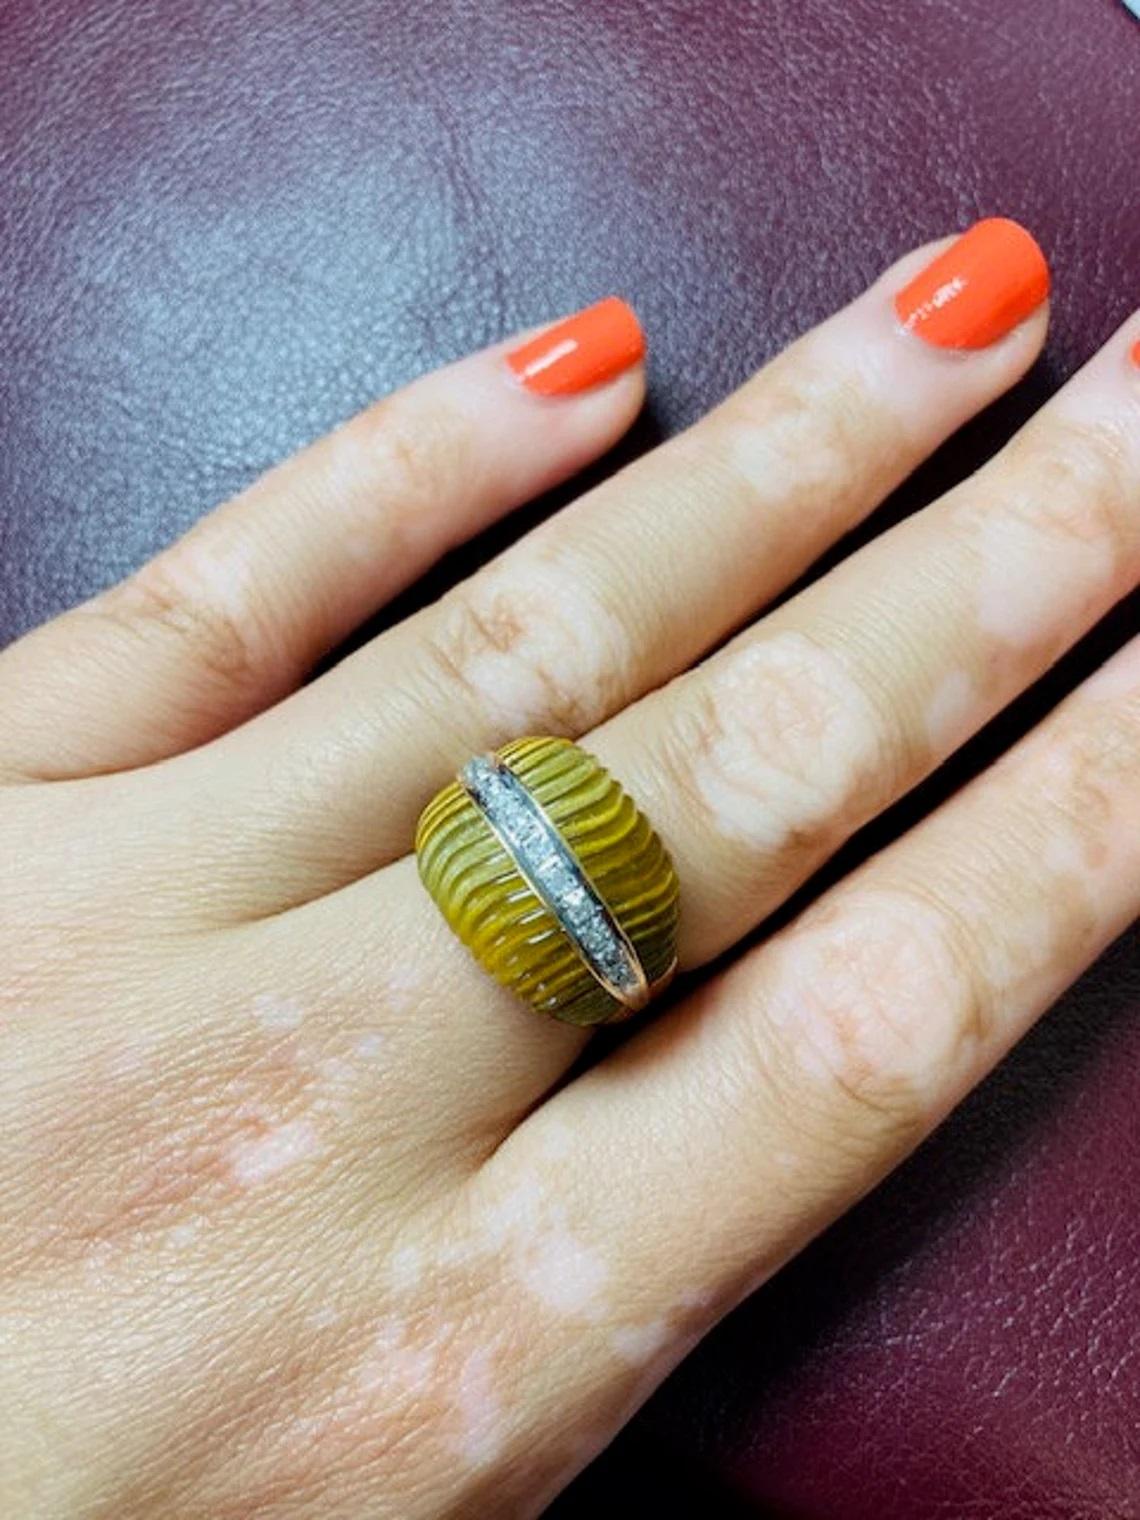 Vintage 14k Gold Tiger's Eye Scalloped Ring One-of-a-kind

This vintage ring from the 1980s is a perfect statement piece. It has scalloped tiger's eye beautifully complimented by a trail of dazzling white diamonds. Made to size N finger